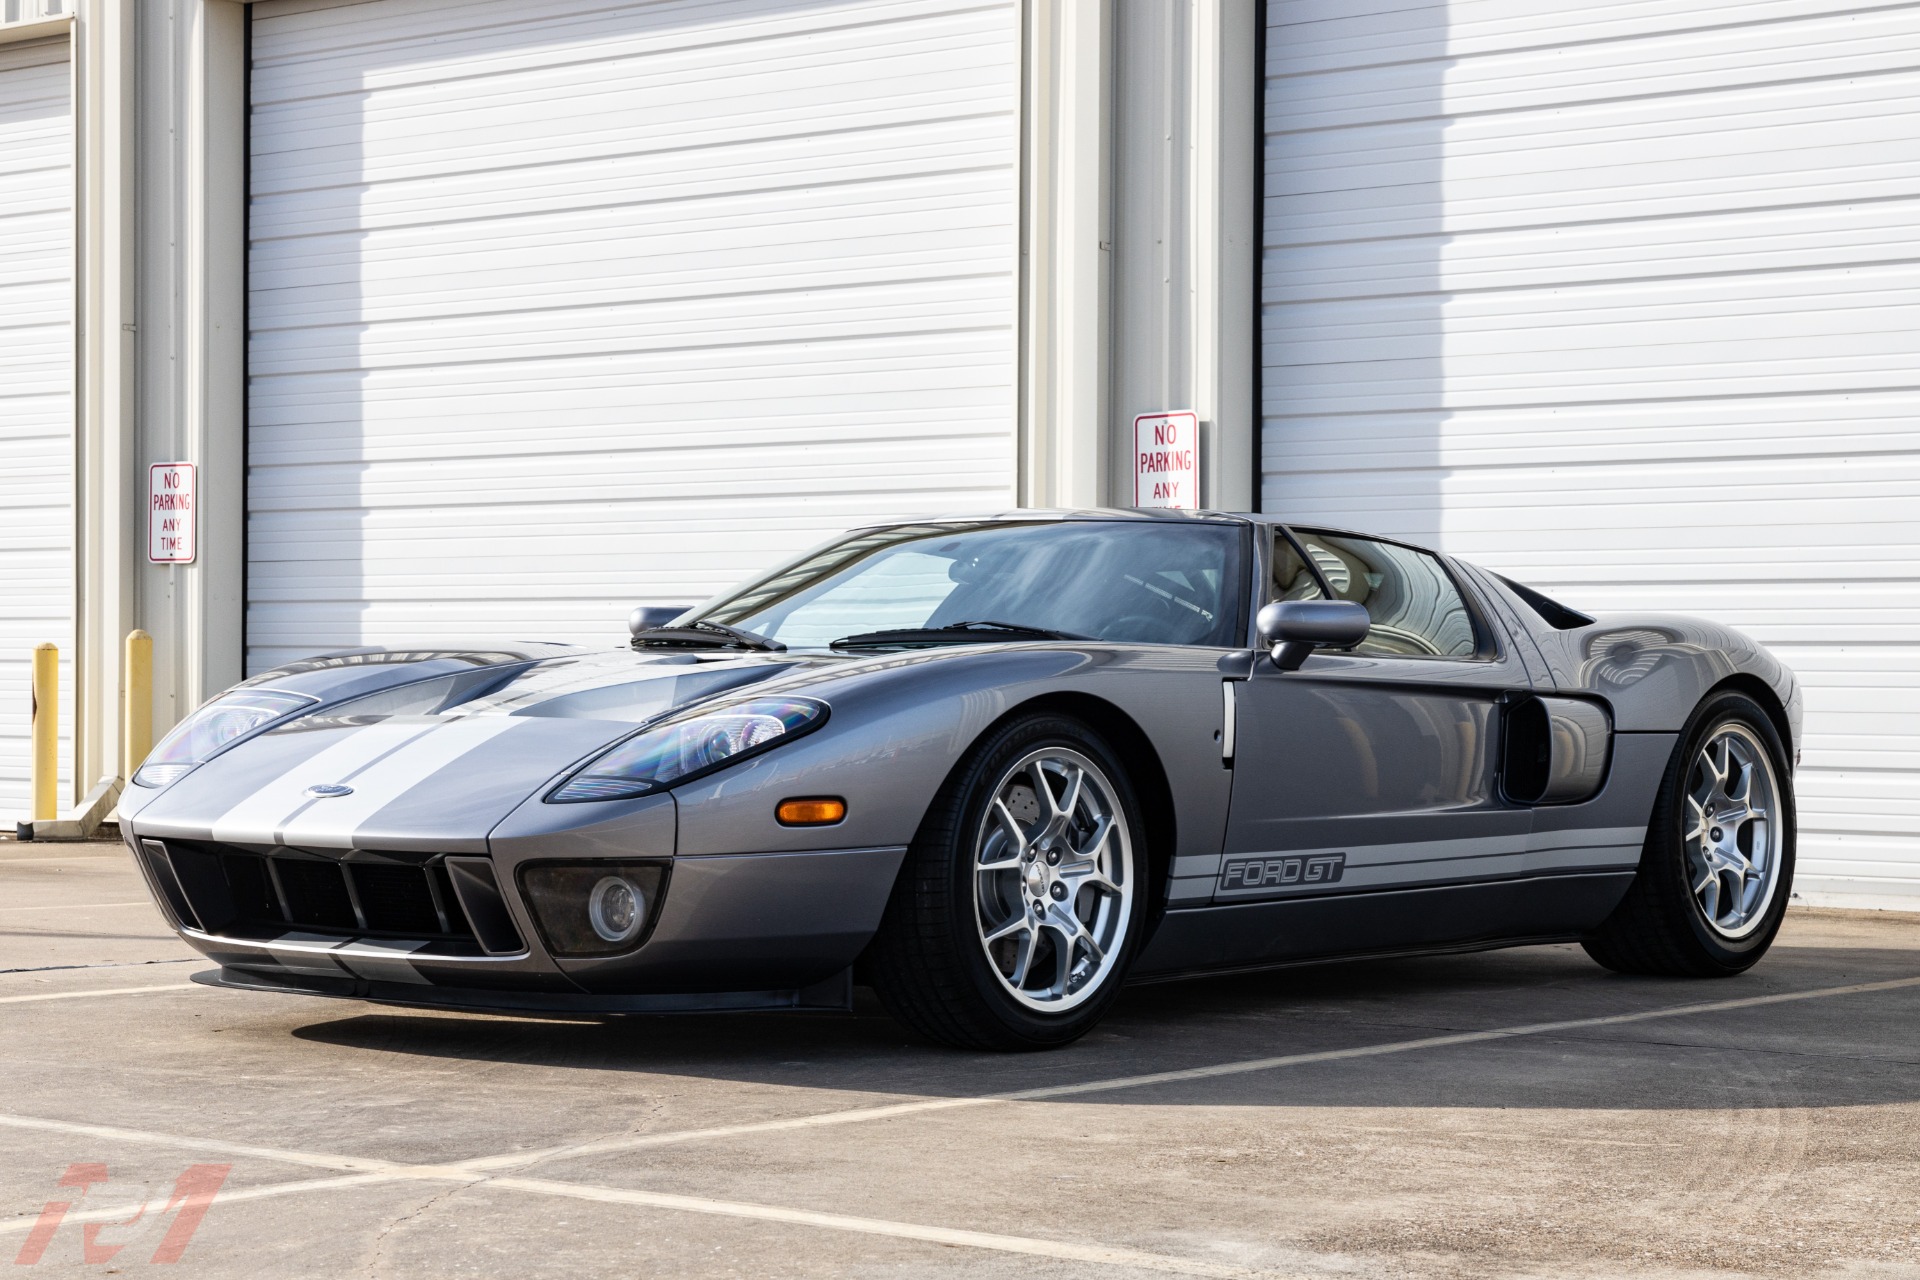 Used-2006-Ford-GT-4-Option-Car-with-5k-miles